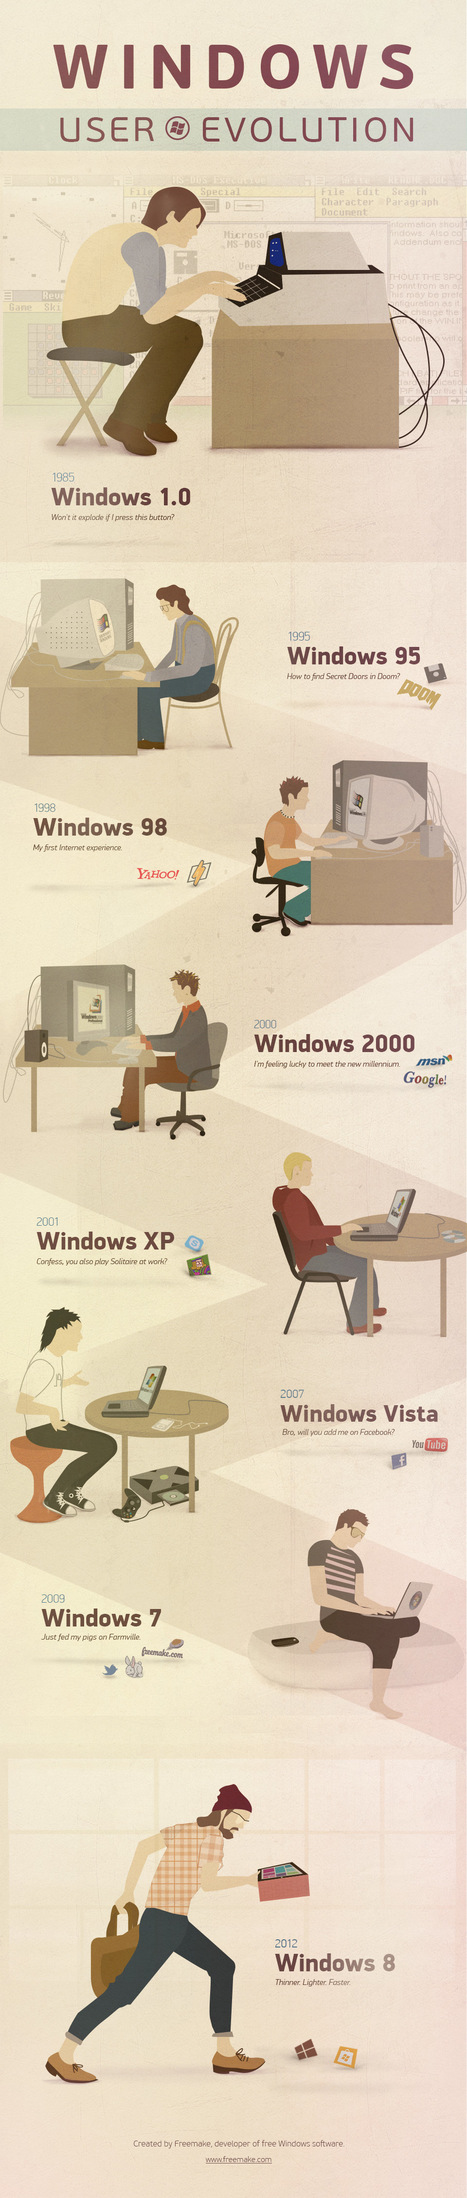 The Evolution of Windows OS From Beginning to Present [INFOGRAPHIC] | 21st Century Learning and Teaching | Scoop.it